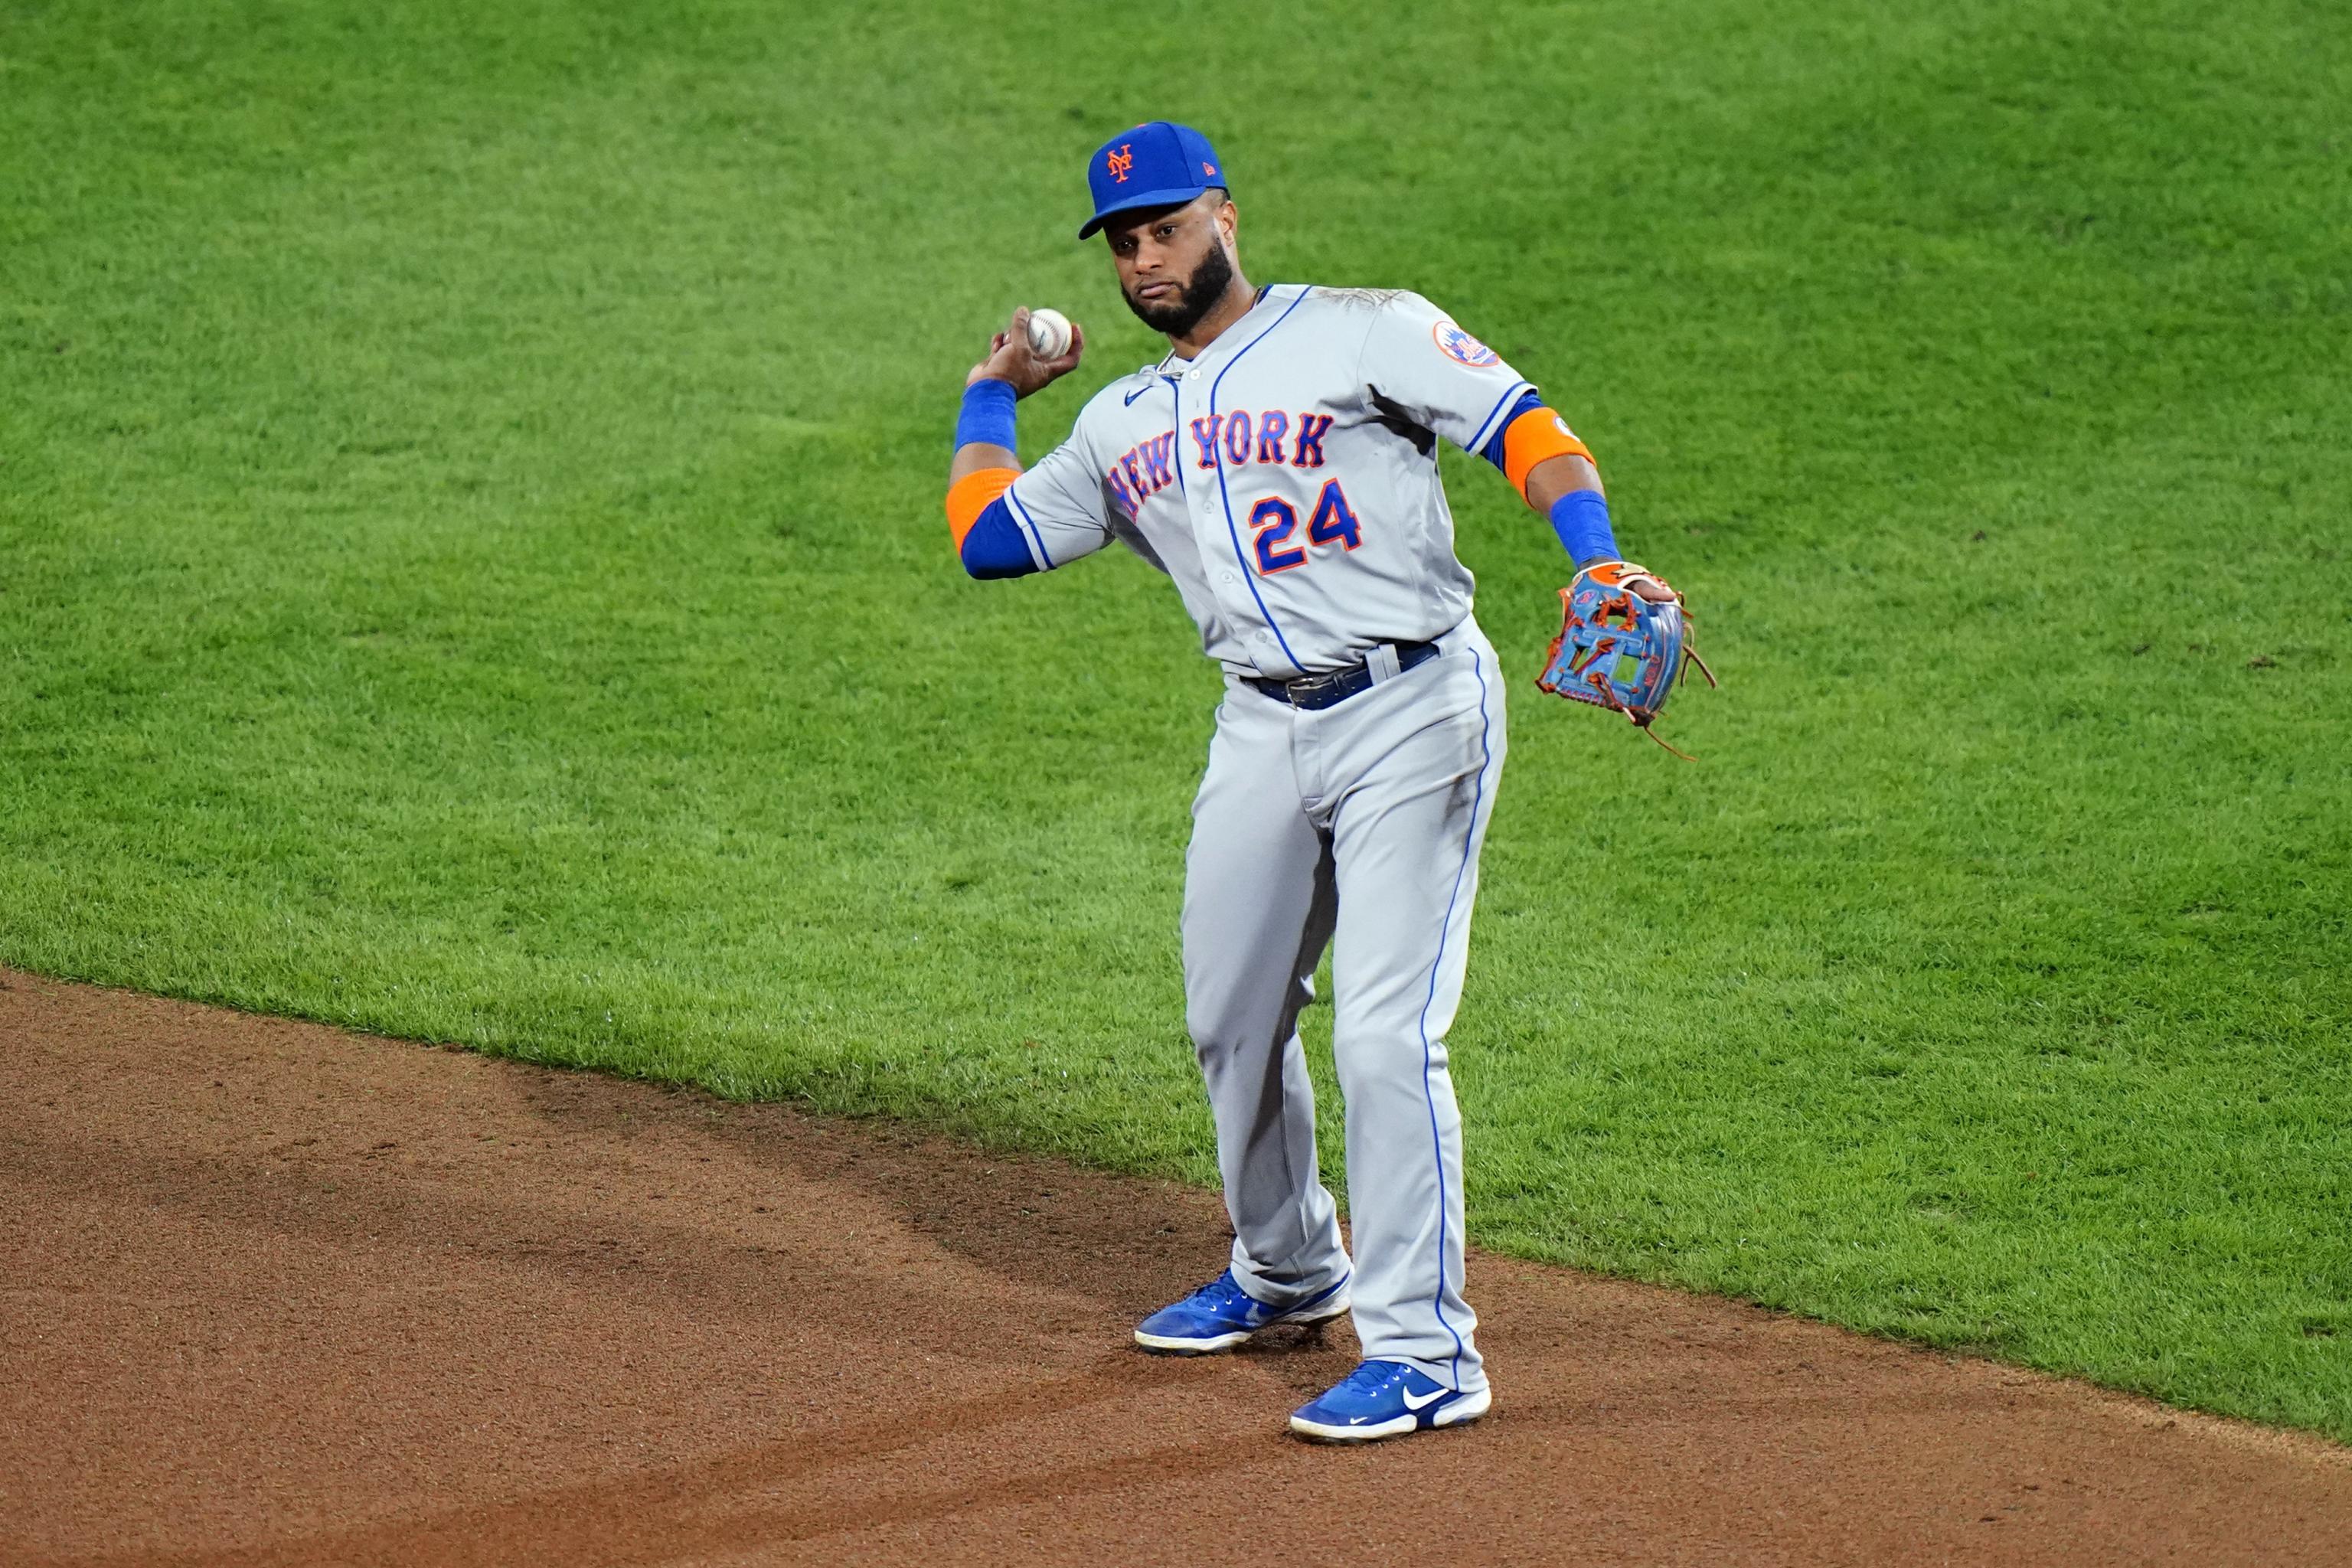 Mets' Robinson Cano apologizes after season lost to PED ban